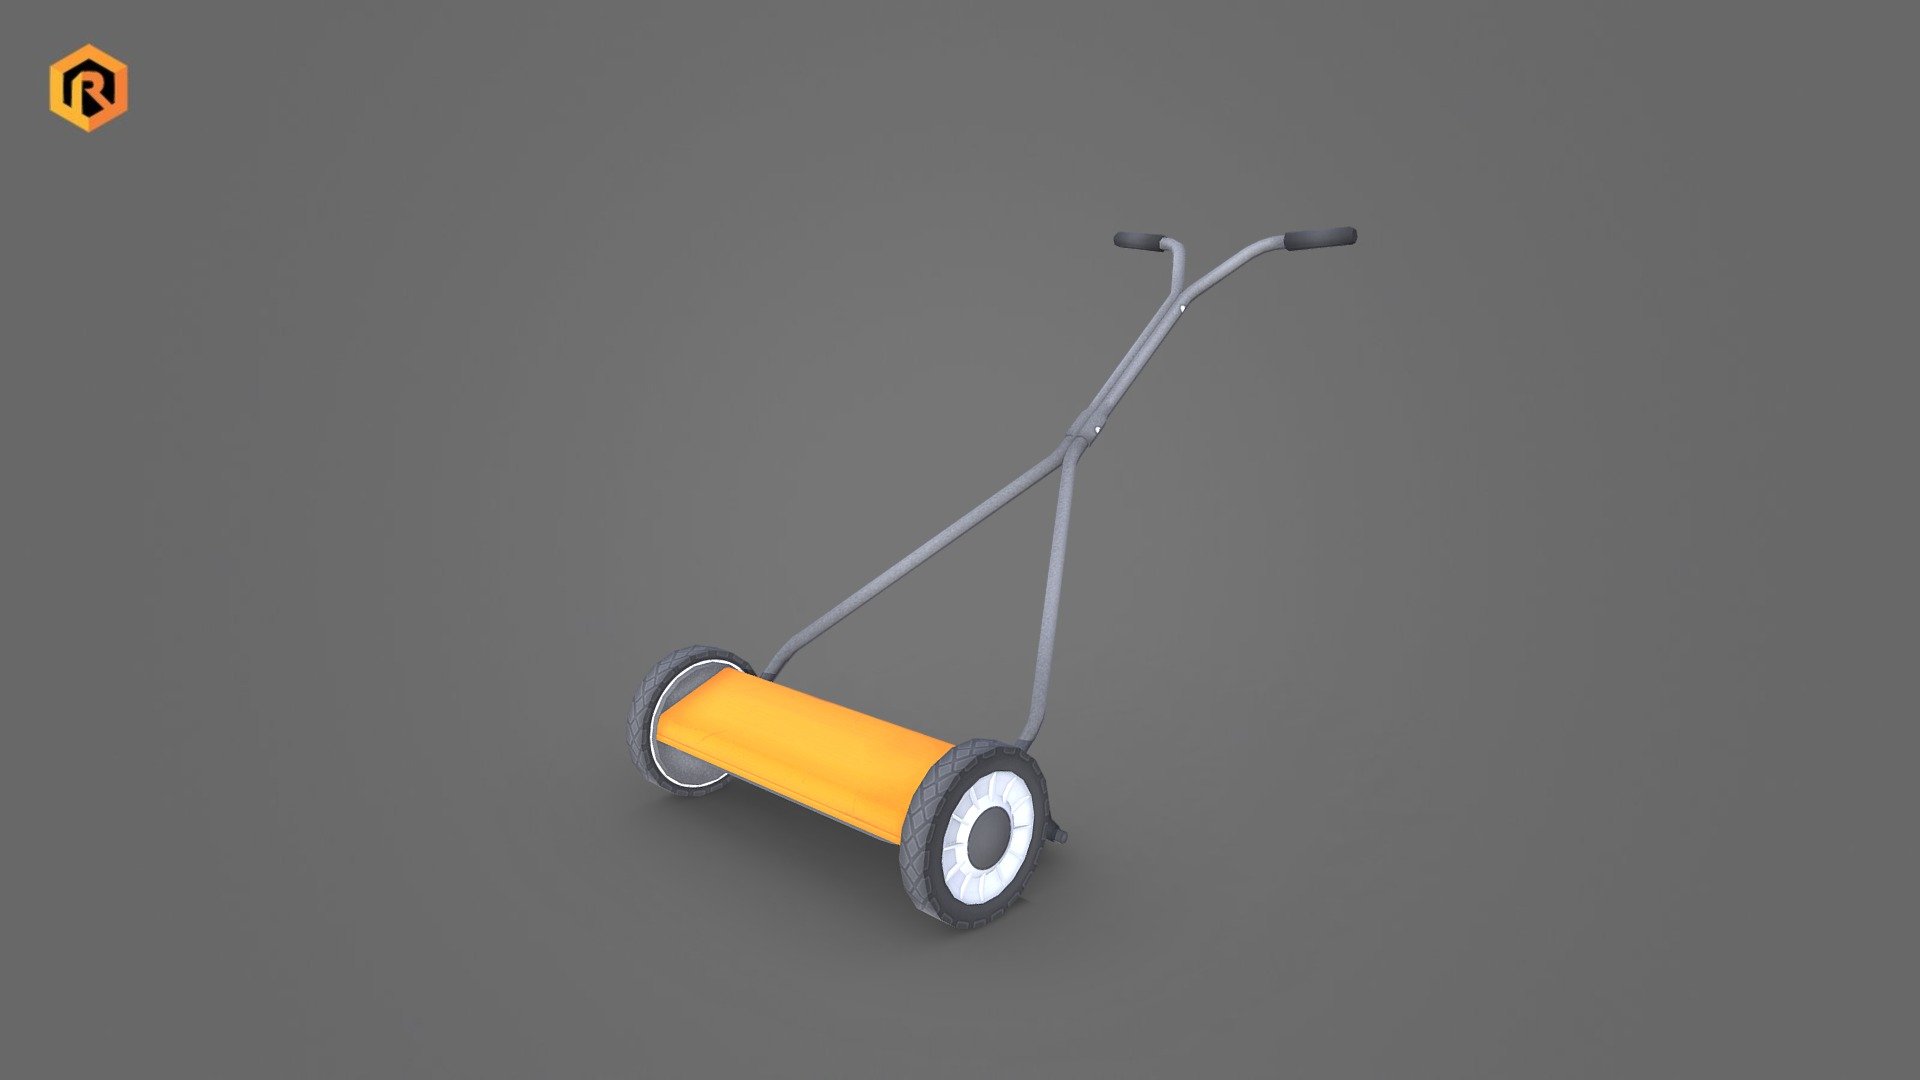 Low-poly 3D model of Lawn Mower.

It is best for use in games and other VR / AR, real-time applications such as Unity or Unreal Engine.

It can also be rendered in Blender (ex Cycles) or Vray as the model is equipped with all required PBR textures.  

**You can also get this model in these bundles: ** 

https://skfb.ly/otro7 

https://skfb.ly/osCqC 

https://skfb.ly/osRTL    

Model Info:




2048 x 2048 Diffuse and AO textures

2568 Triangles

1542 Vertices

Model is correctly divided into parts to suit animation process.

Pivot points are correctly placed to suit animation process.

Model scaled to approximate real world size (centimeters).

All nodes, materials and textures are appropriately named.

More file formats are available in additional zip file on product page.

Please feel free to contact me if you have any questions or need any support for this asset.

Support e-mail: support@rescue3d.com - Push Reel Lawn Mower - Buy Royalty Free 3D model by Rescue3D Assets (@rescue3d) 3d model